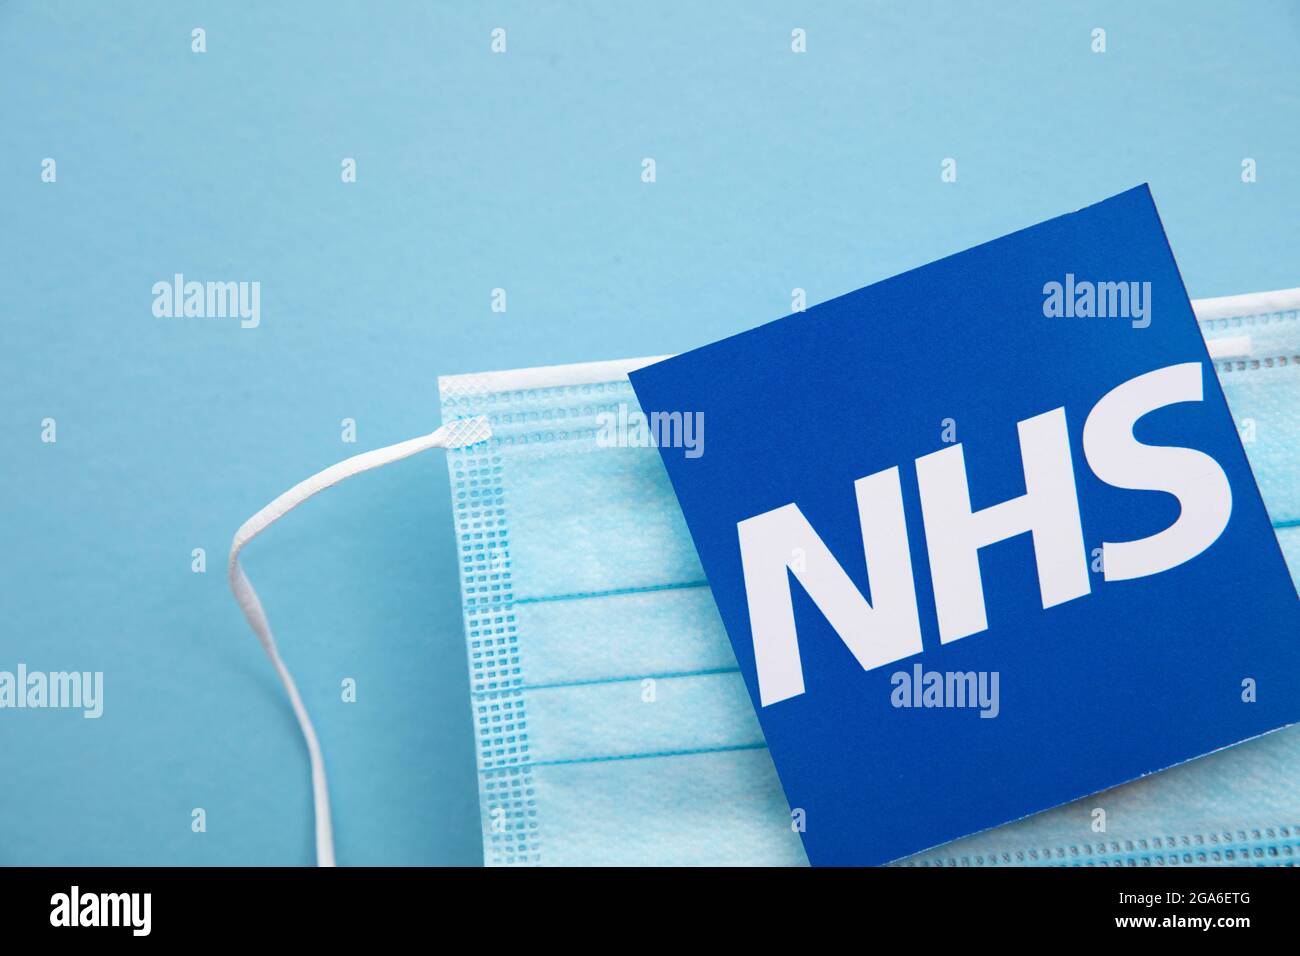 LONDON, UK - July 2021: NHS National health service logo with covid mask Stock Photo